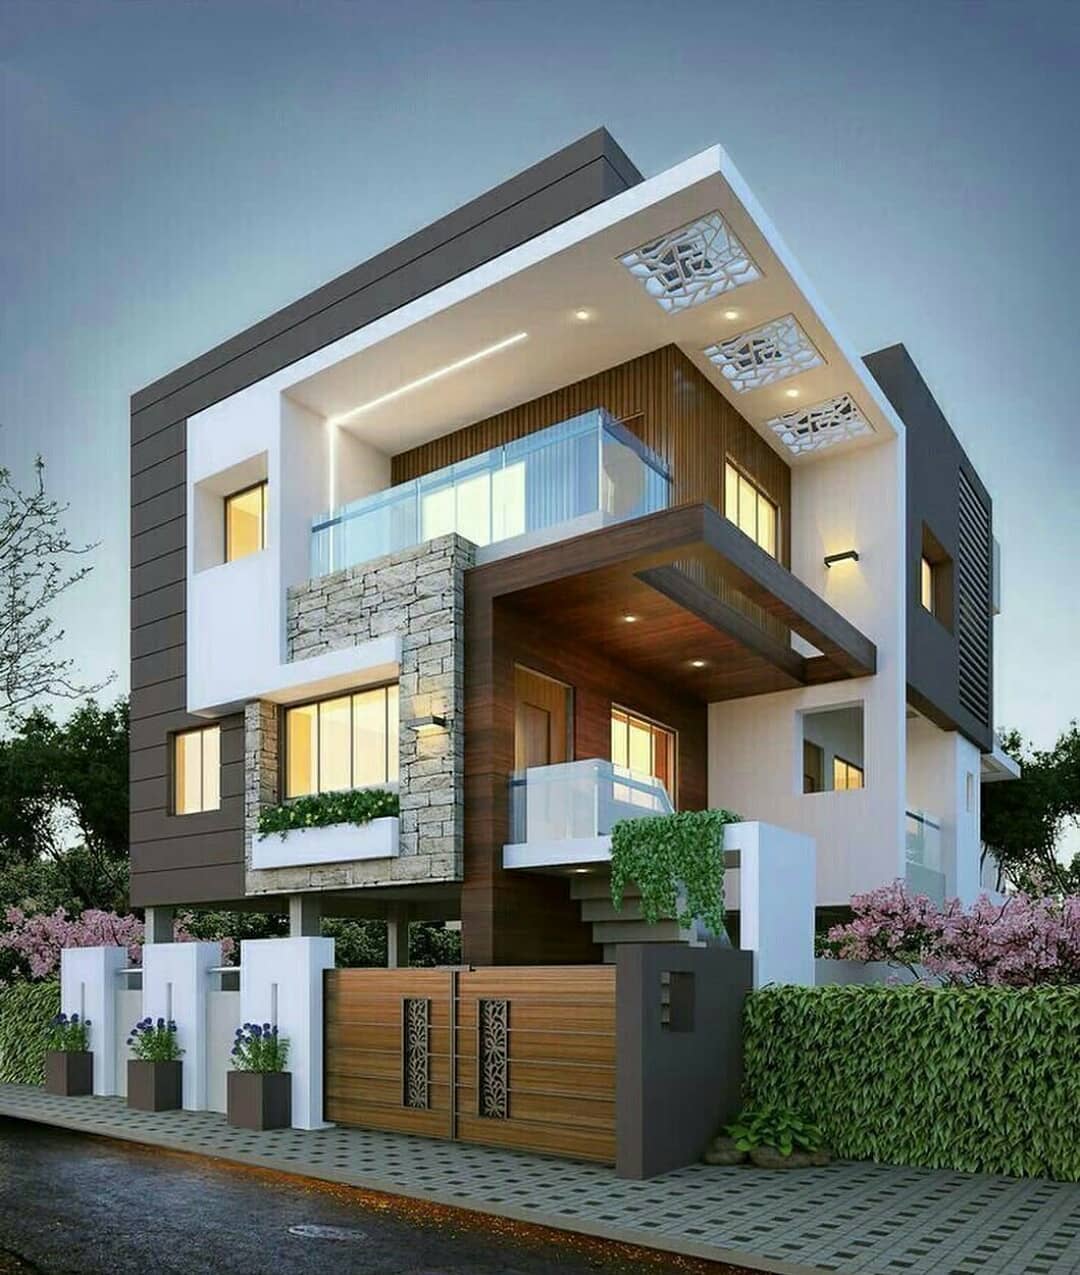 Large Modern Home with Multiple Balconies. Photo by Instagram user @easy_civil